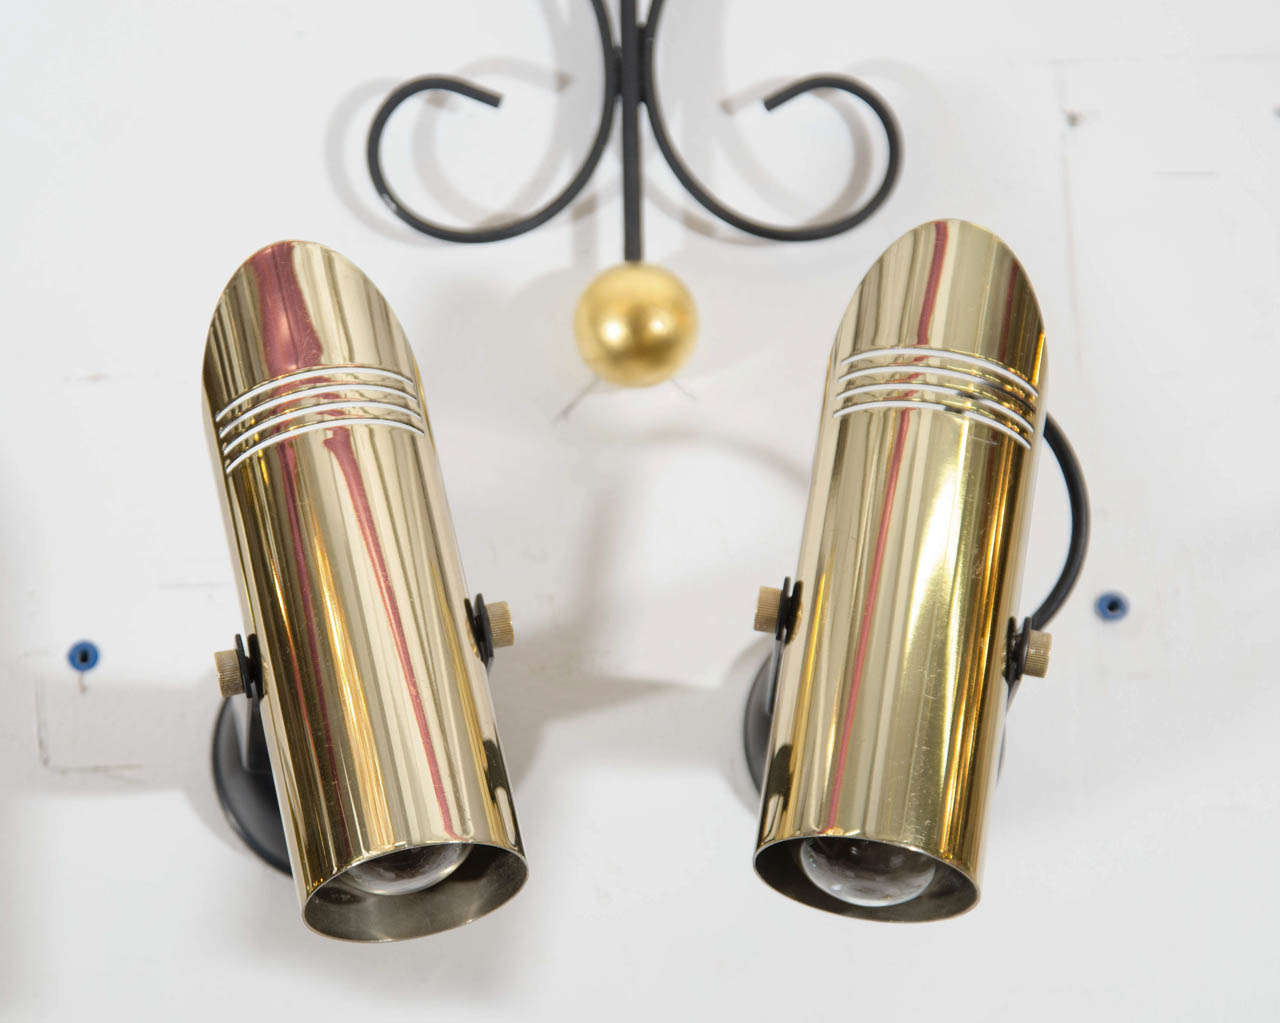 A vintage pair of pivoting spot lights or wall sconces in brass and black enamel.

Good vintage condition with slight scratches to brass and enamel